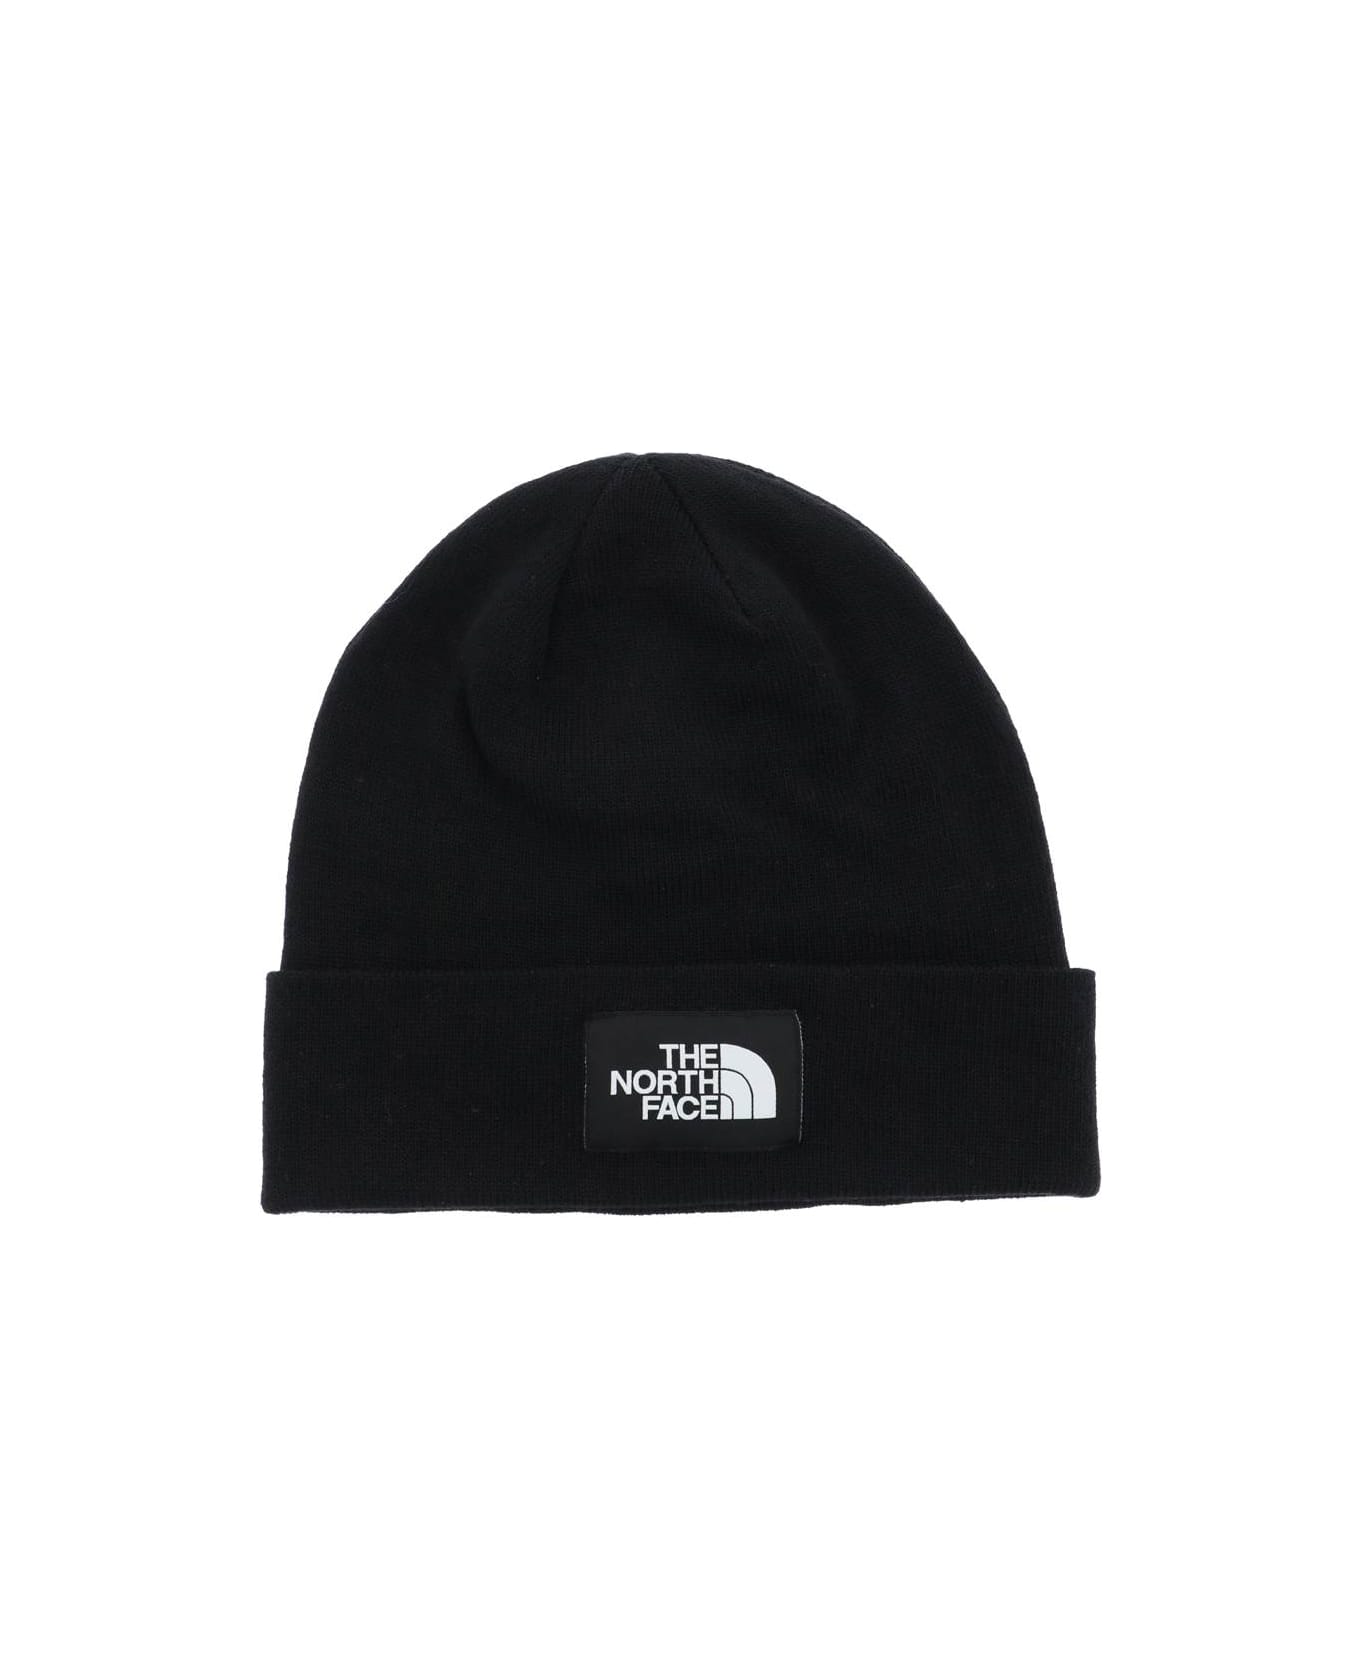 The North Face Dock Worker Beanie Hat - TNF BLACK (Black)